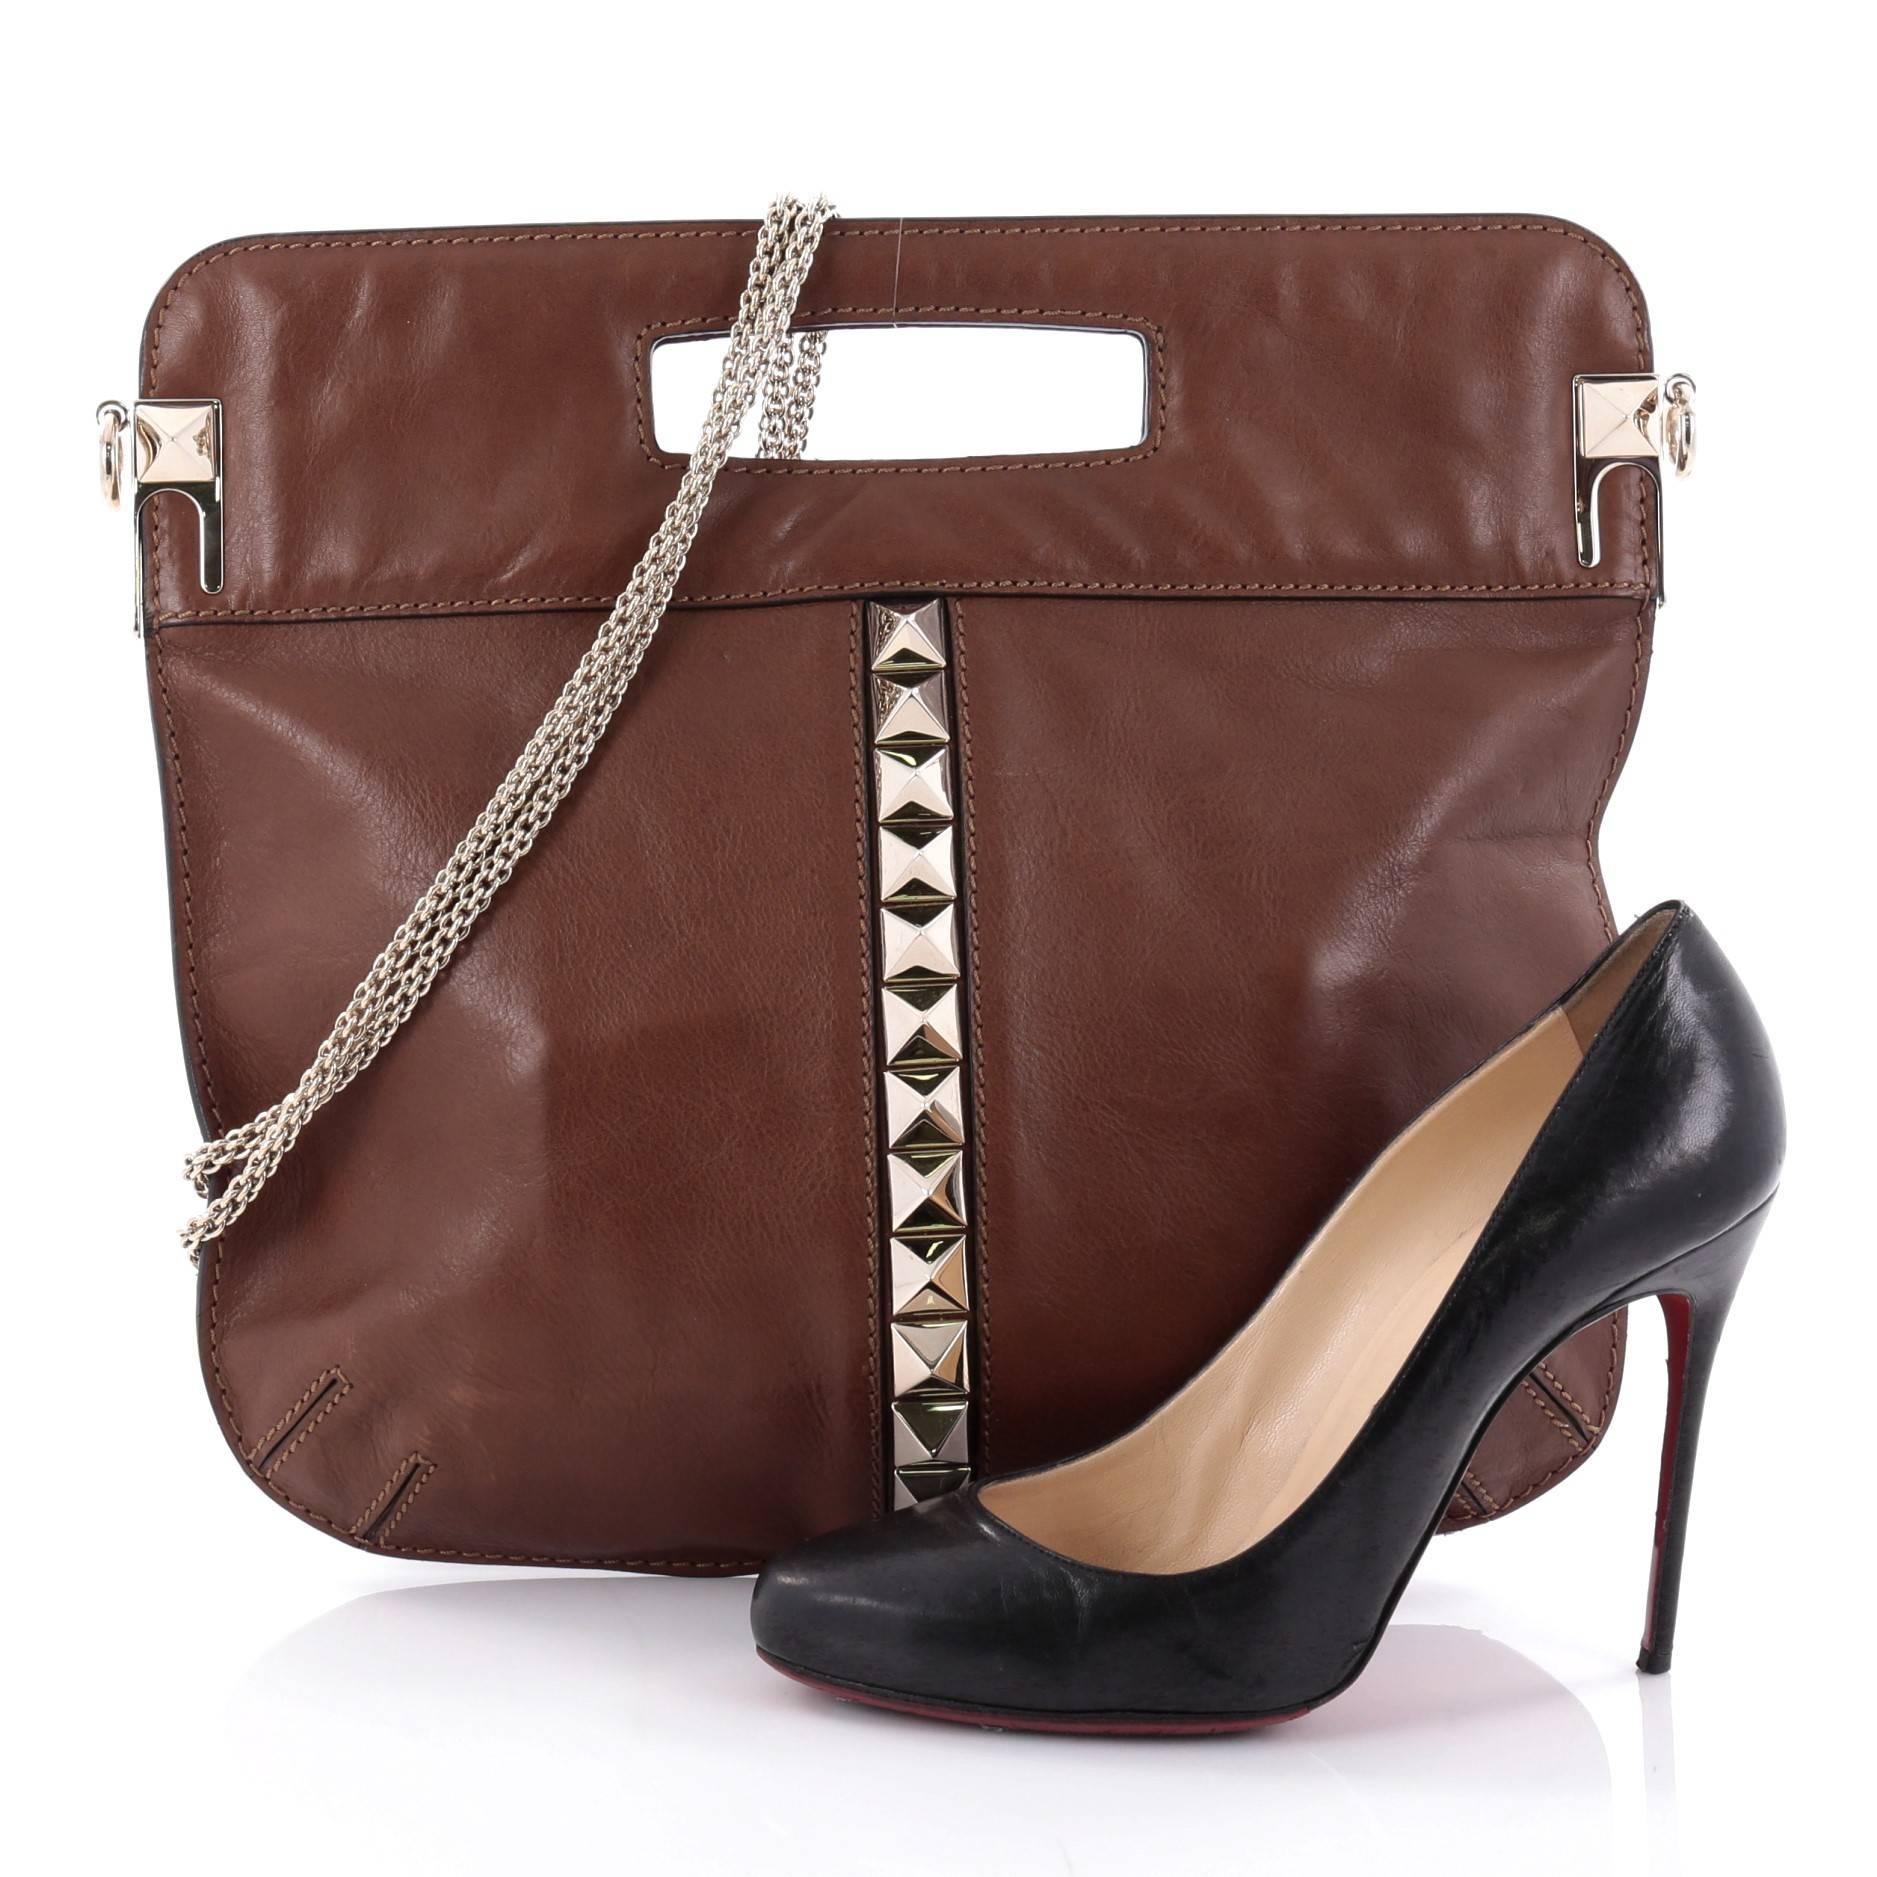 This authentic Valentino Glam Lock Convertible Shoulder Bag Leather Medium is a fun, exciting and bold accessory perfect for your everyday looks. Crafted in brown leather, this stylish bag features chain-link shoulder straps, inset handle, signature